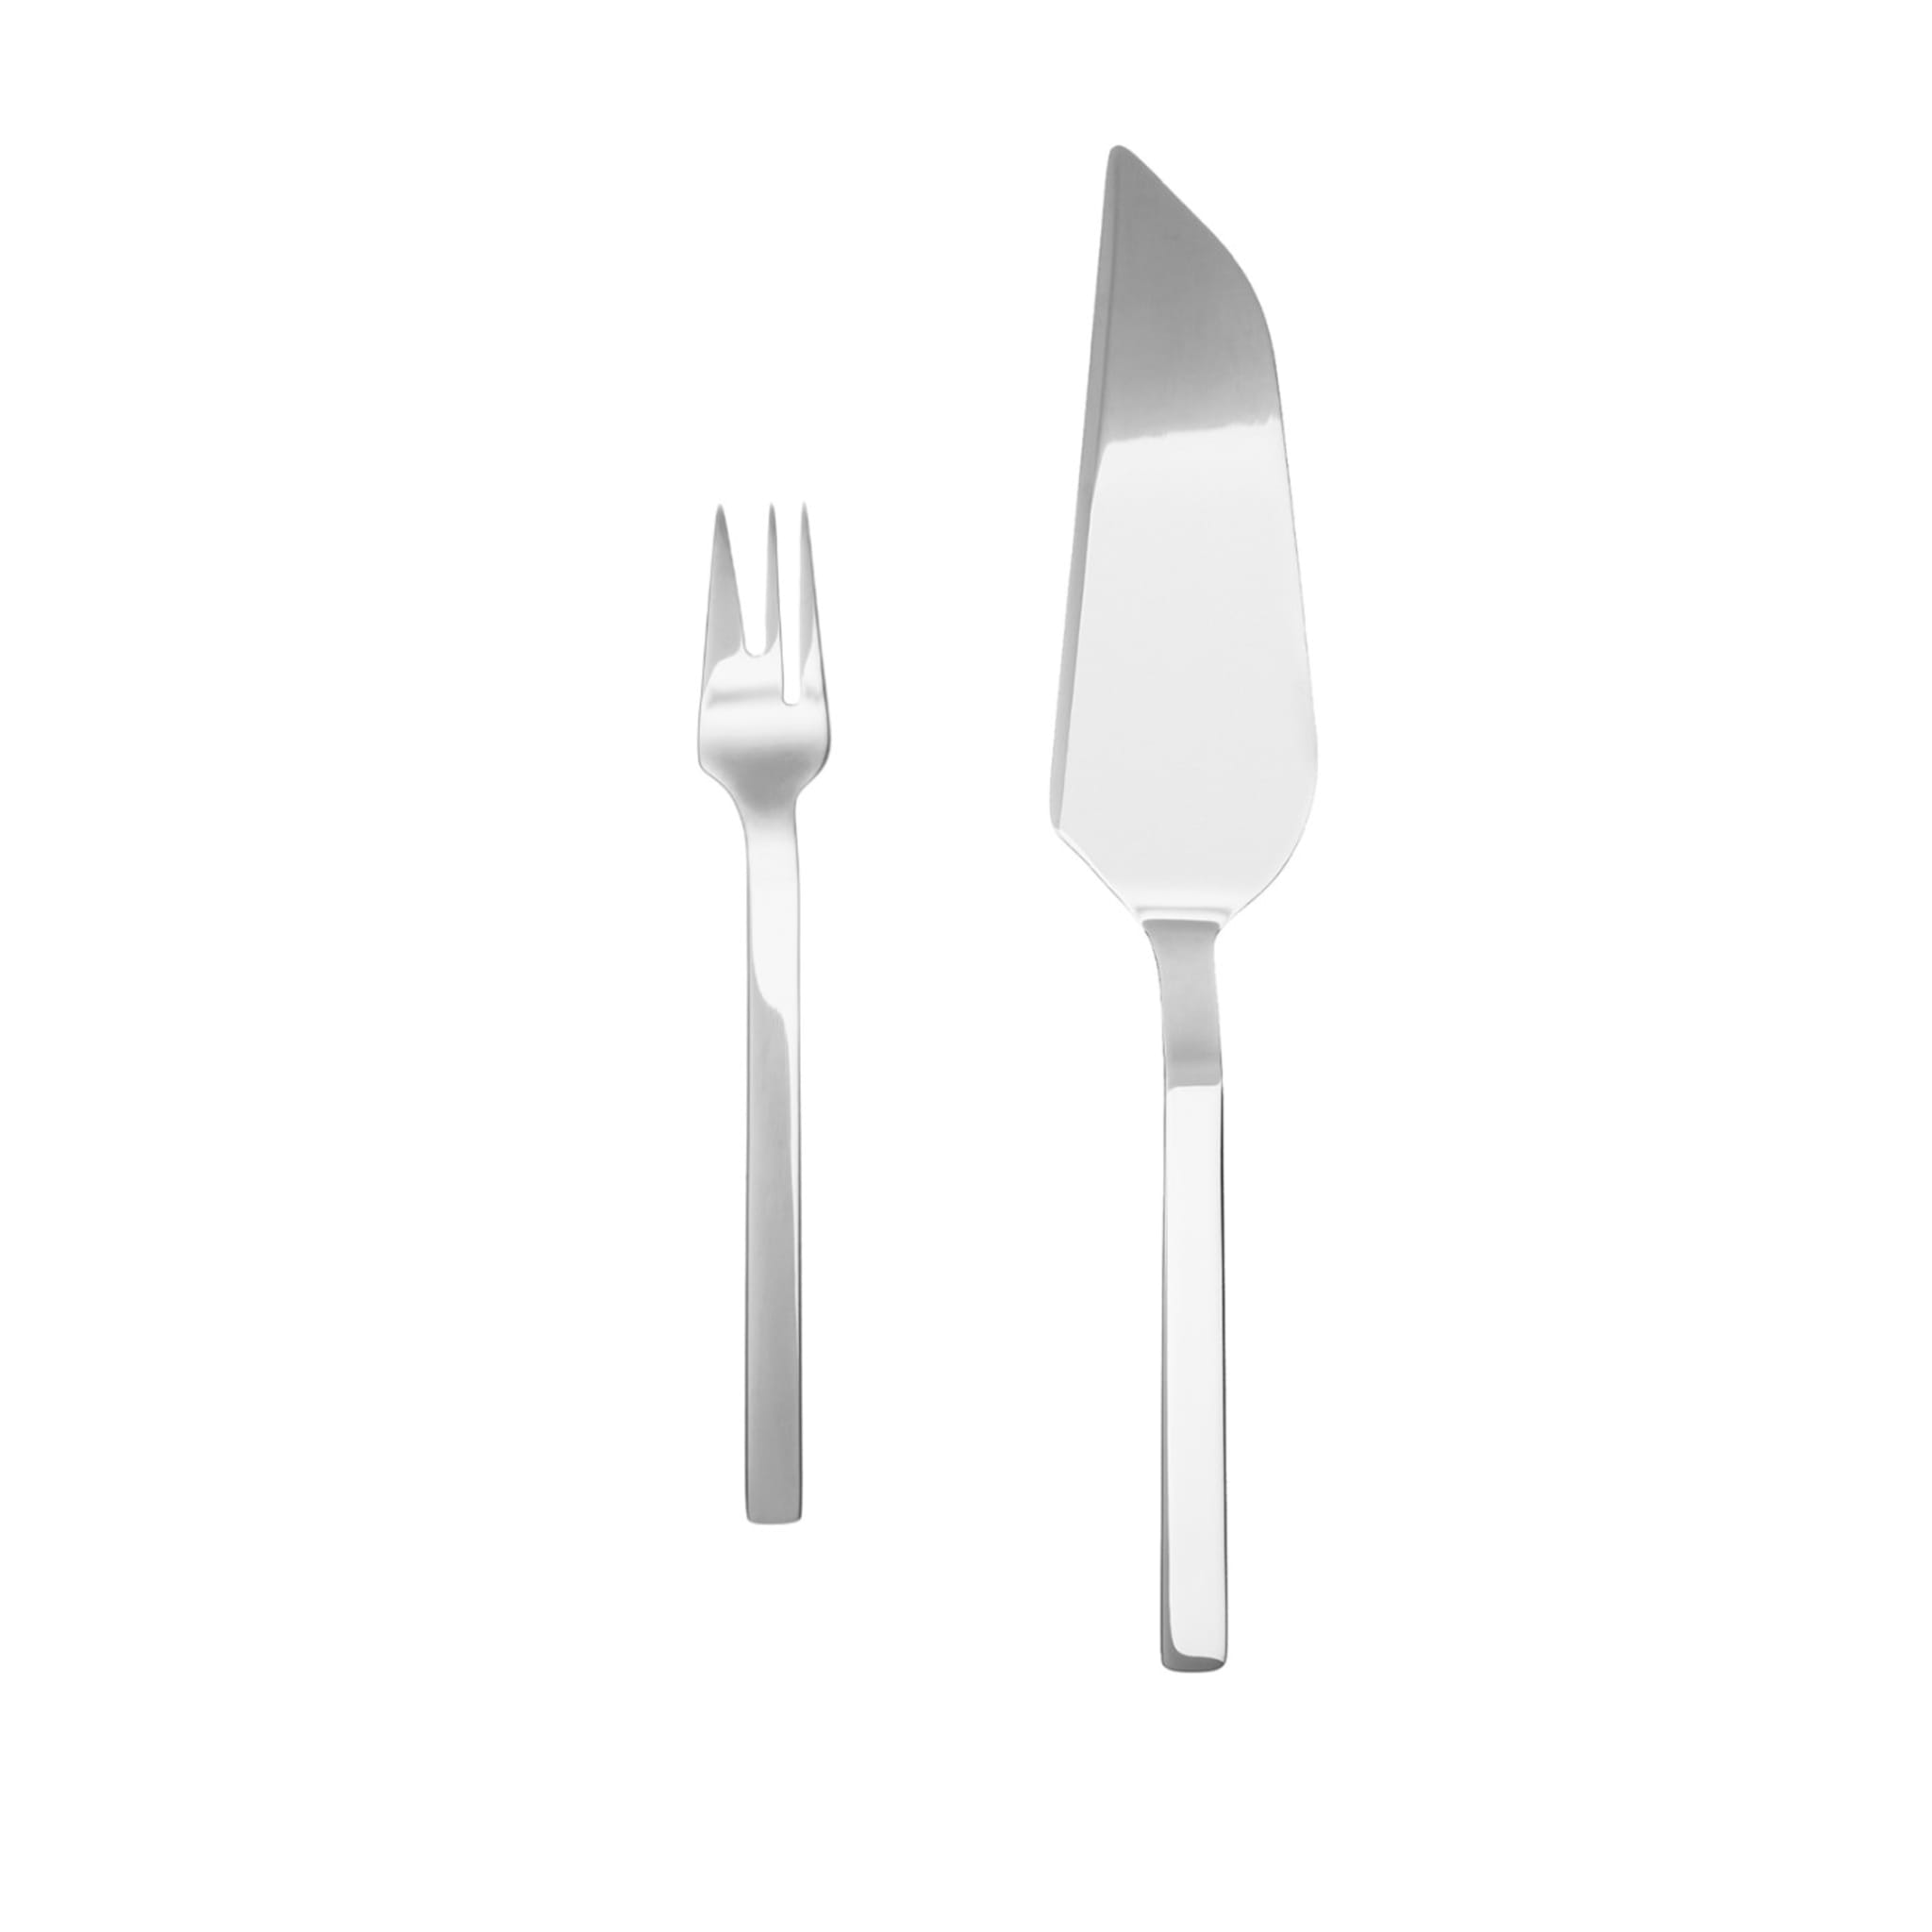 STILE Set of 6 Cake forks and Cake server by Pininfarina - Main view